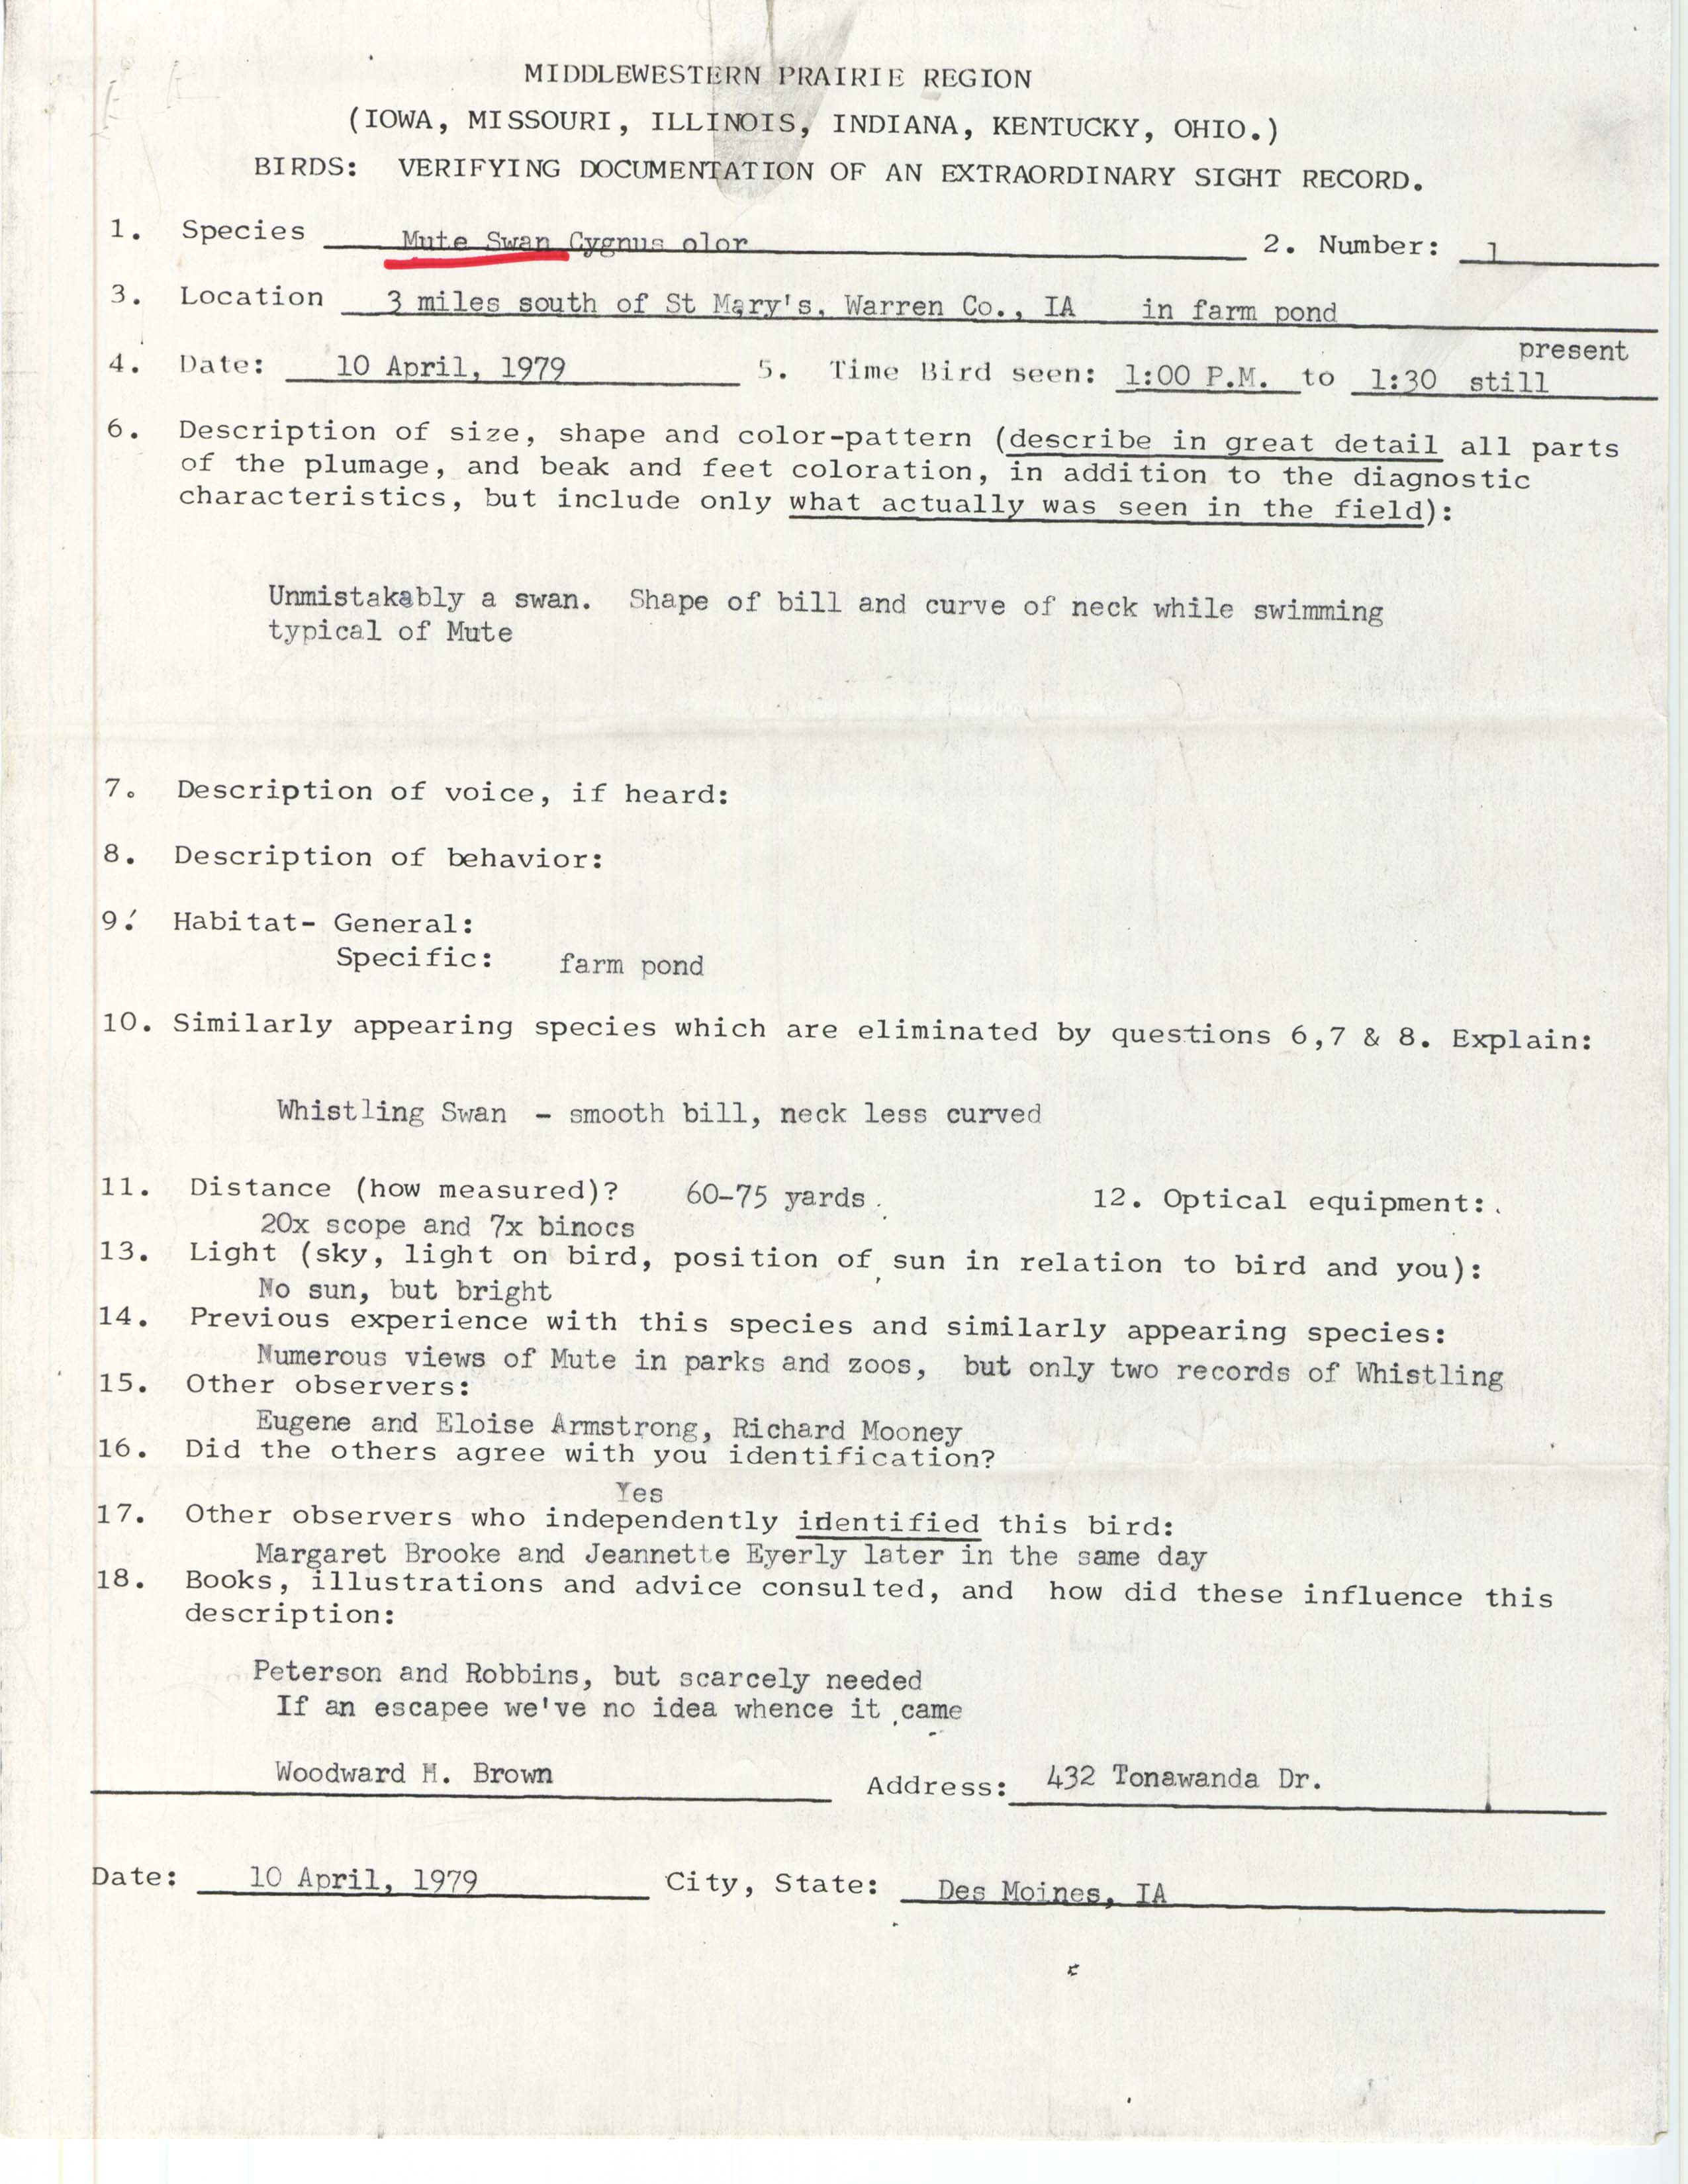 Rare bird documentation form for Mute Swan at St. Mary's in Warren County, 1979